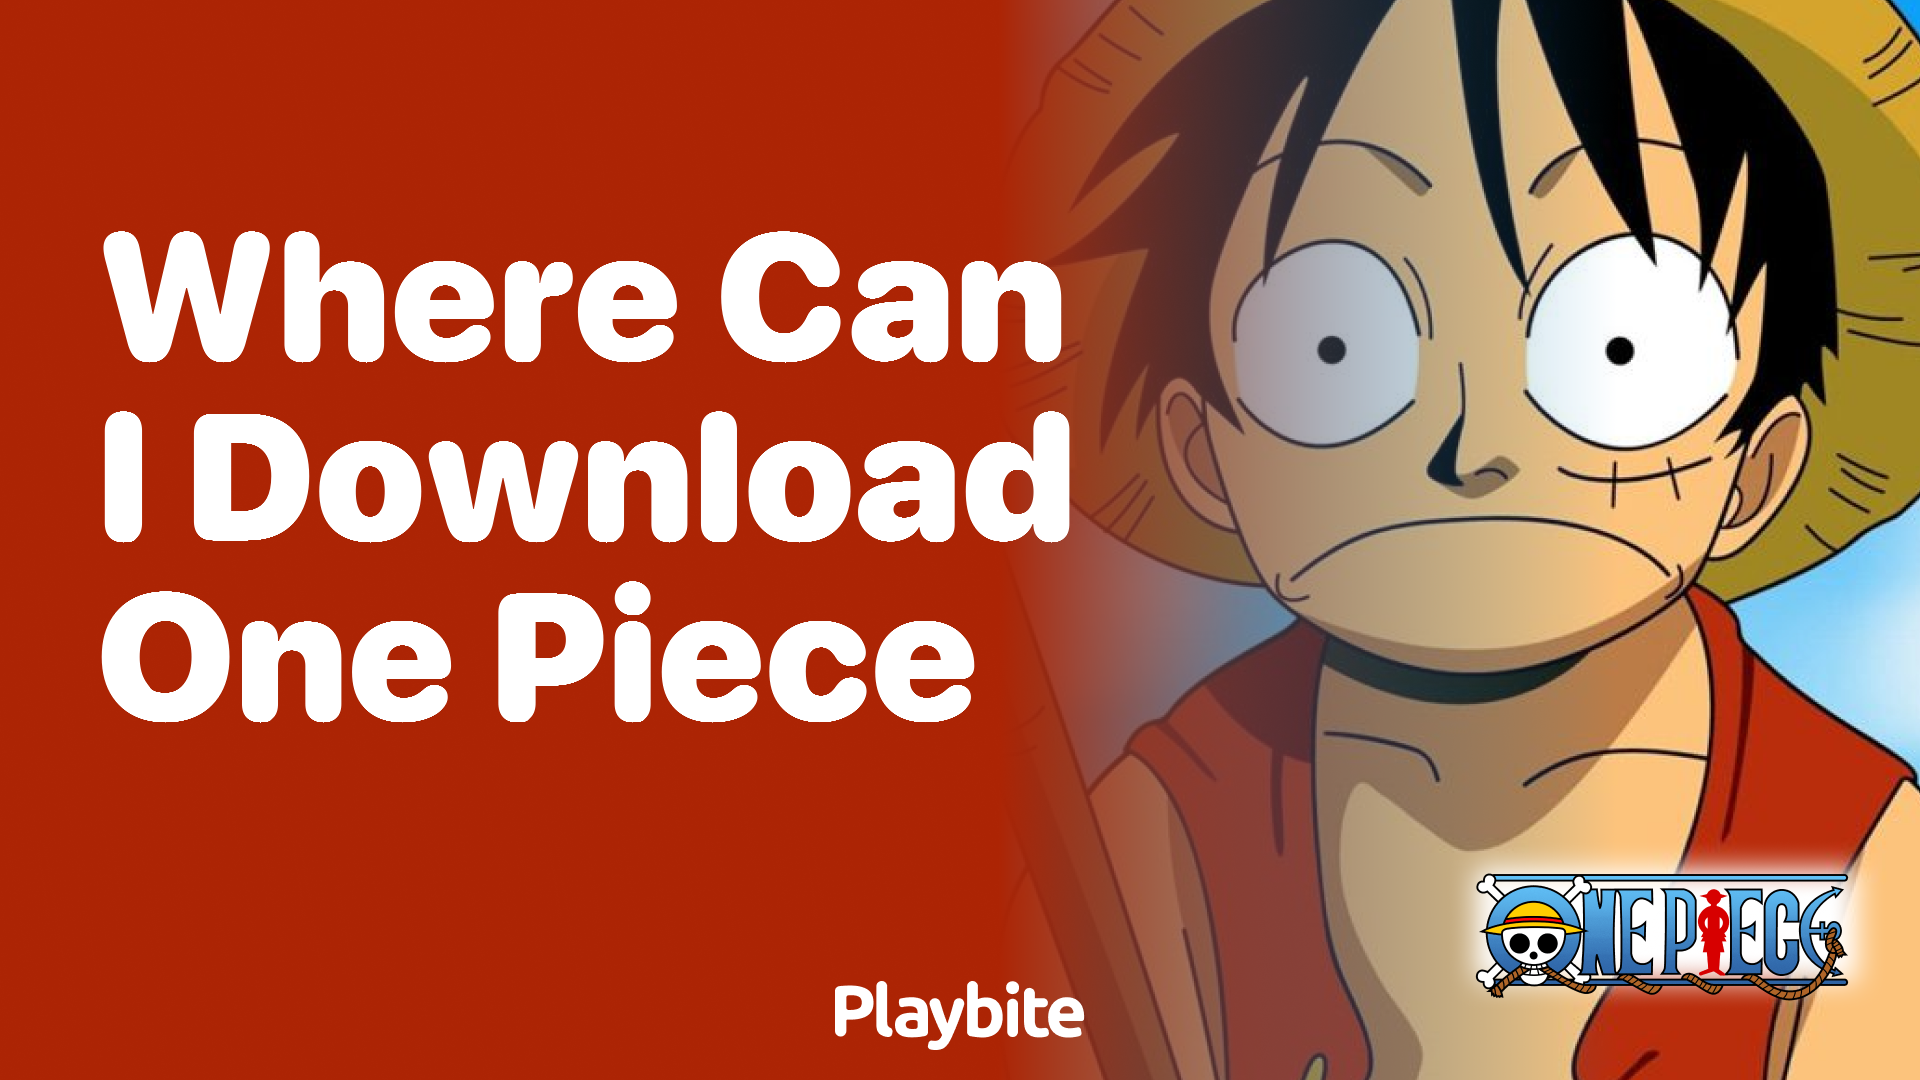 Where can I download One Piece?